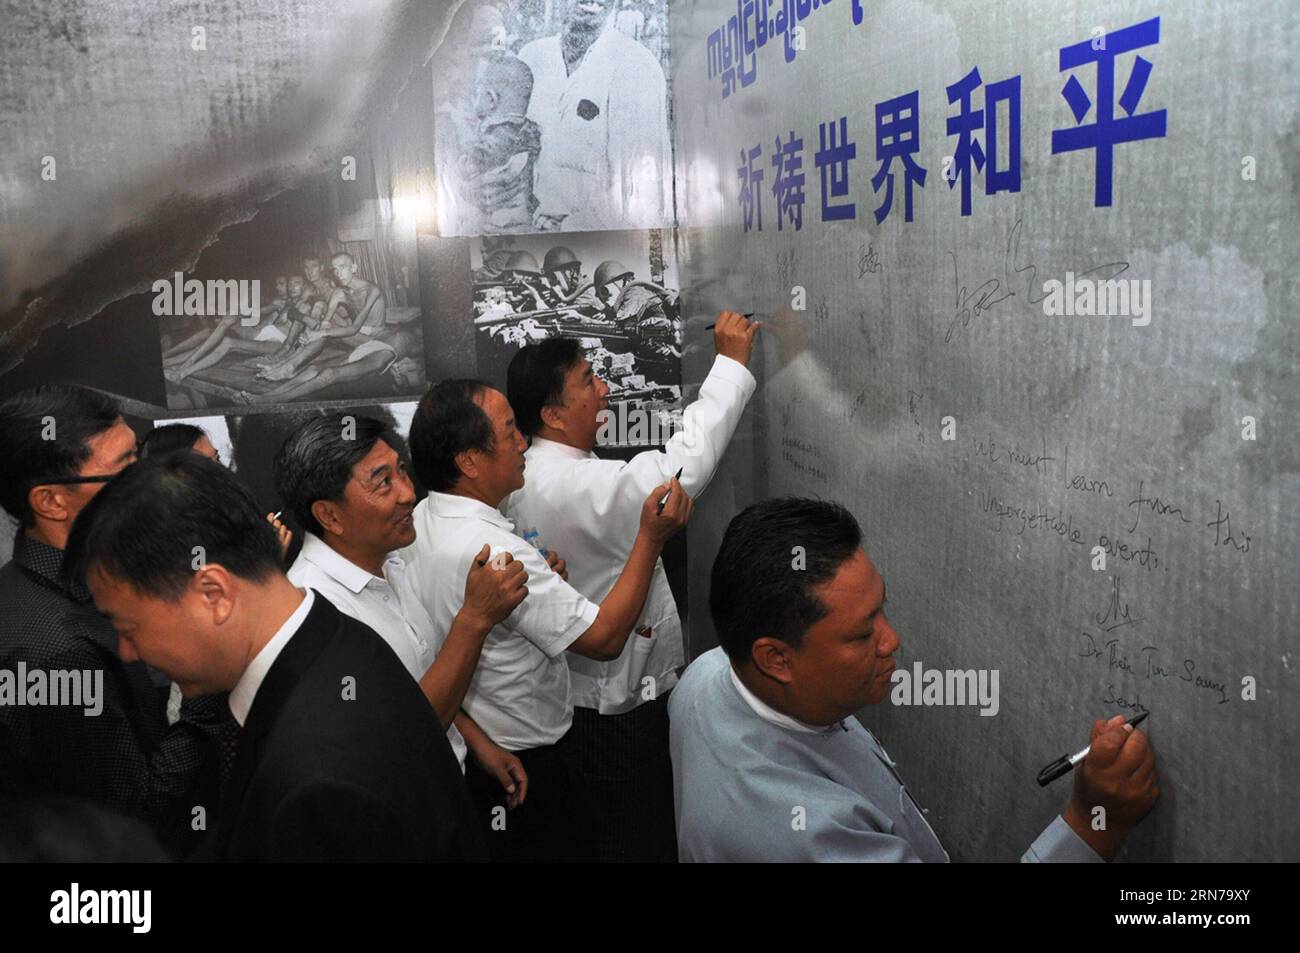 (150829) -- MANDALAY, Aug. 29, 2015 -- Guests sign on a large board for commemoration of the 70th anniversary of the victory of World War II during a photo exhibition in Mandalay, Myanmar, Aug. 29, 2015. A photo exhibition marking the 70th anniversary of the victory of anti-fascist war was launched on Saturday in Mandalay, the second largest city of Myanmar, under the theme of pray for world peace, don t forget the lessons of history. ) (zjy) MYANAMR-MANDALAY-WWII-PHOTO EXHIBITION HouxBaoqiang PUBLICATIONxNOTxINxCHN   150829 Mandalay Aug 29 2015 Guests Sign ON a Large Board for Commemoration o Stock Photo